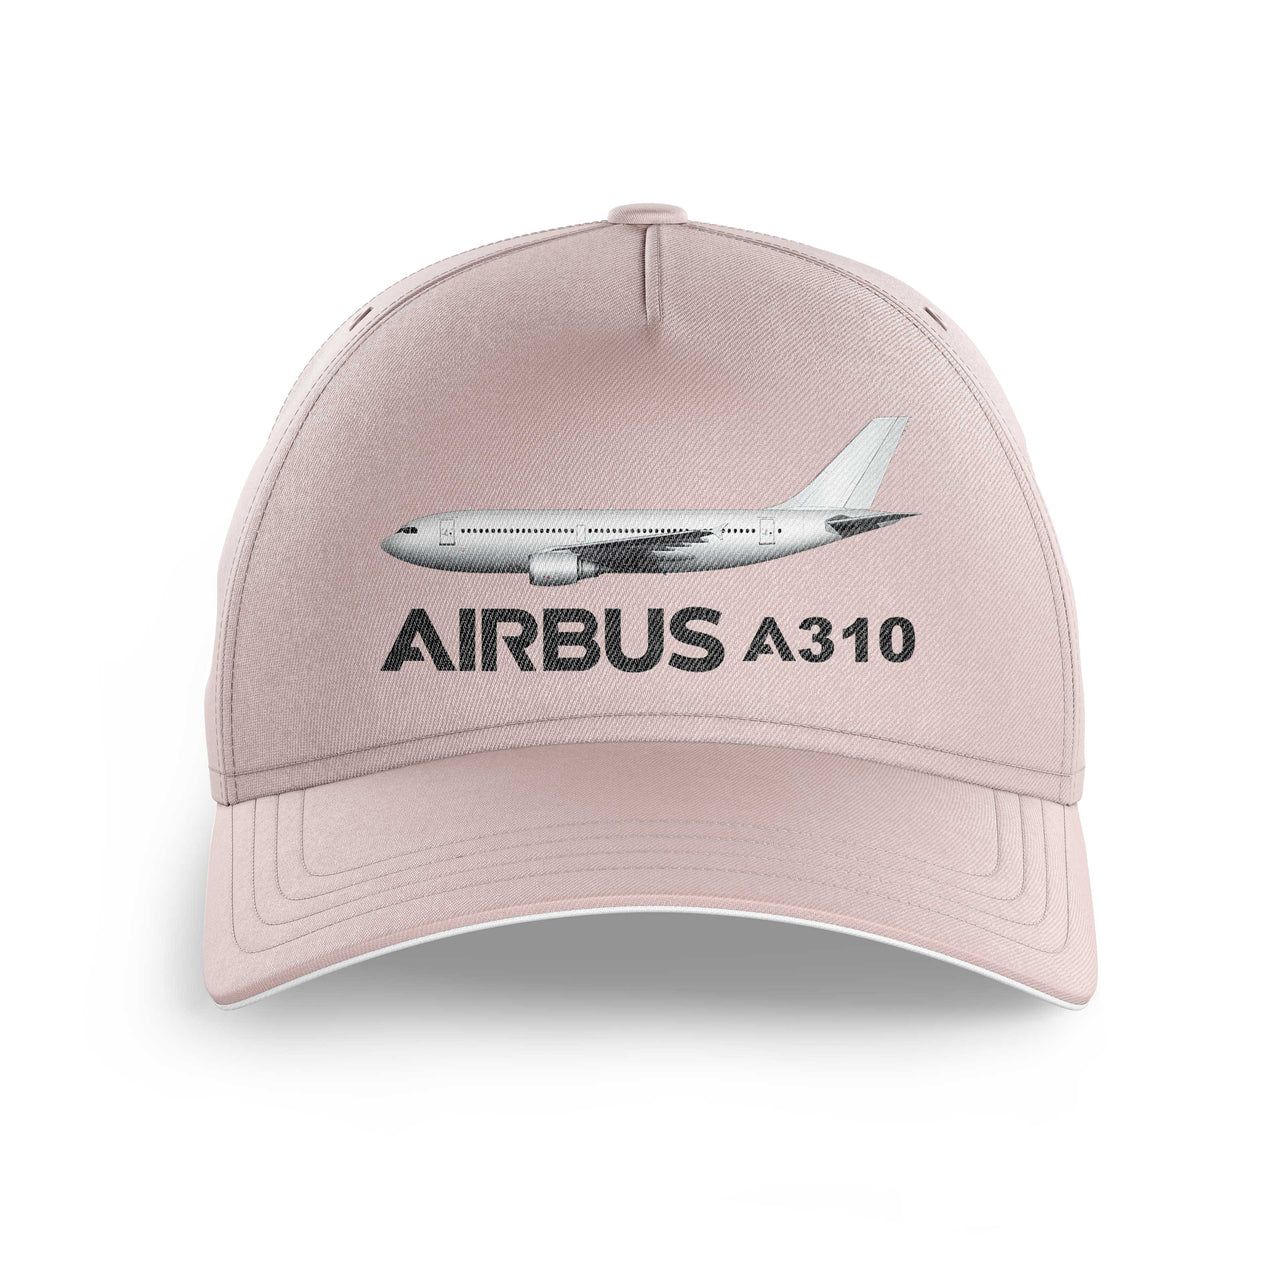 The Airbus A310 Printed Hats